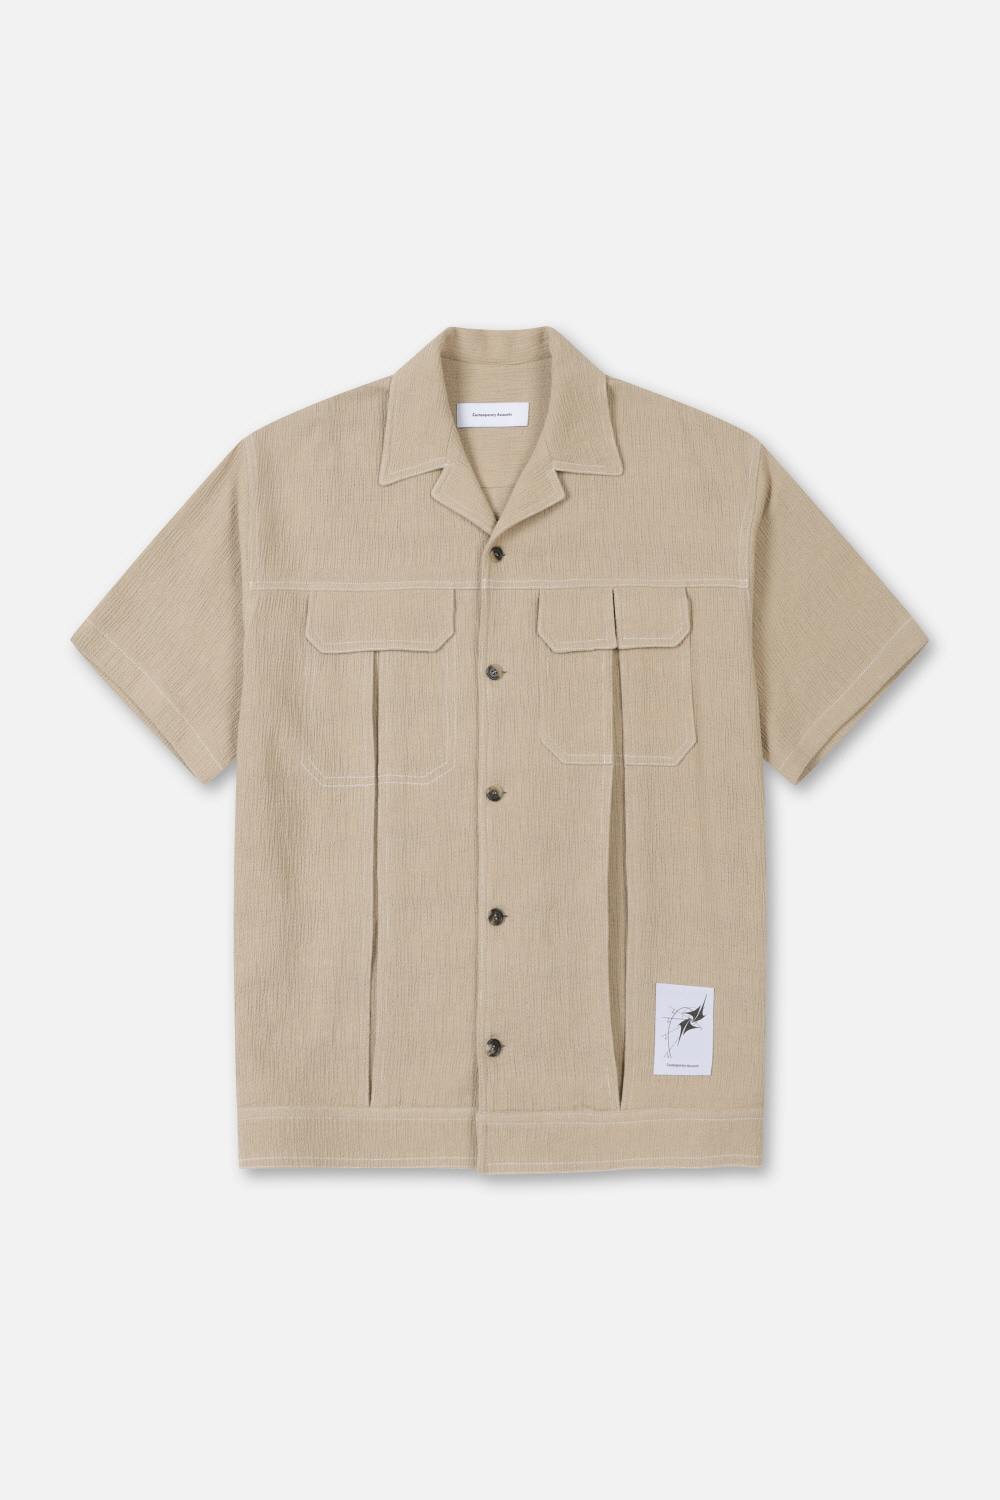 PLEATED DETAIL OUT POCKET SHORT SLEEVES SHIRT (BEIGE)